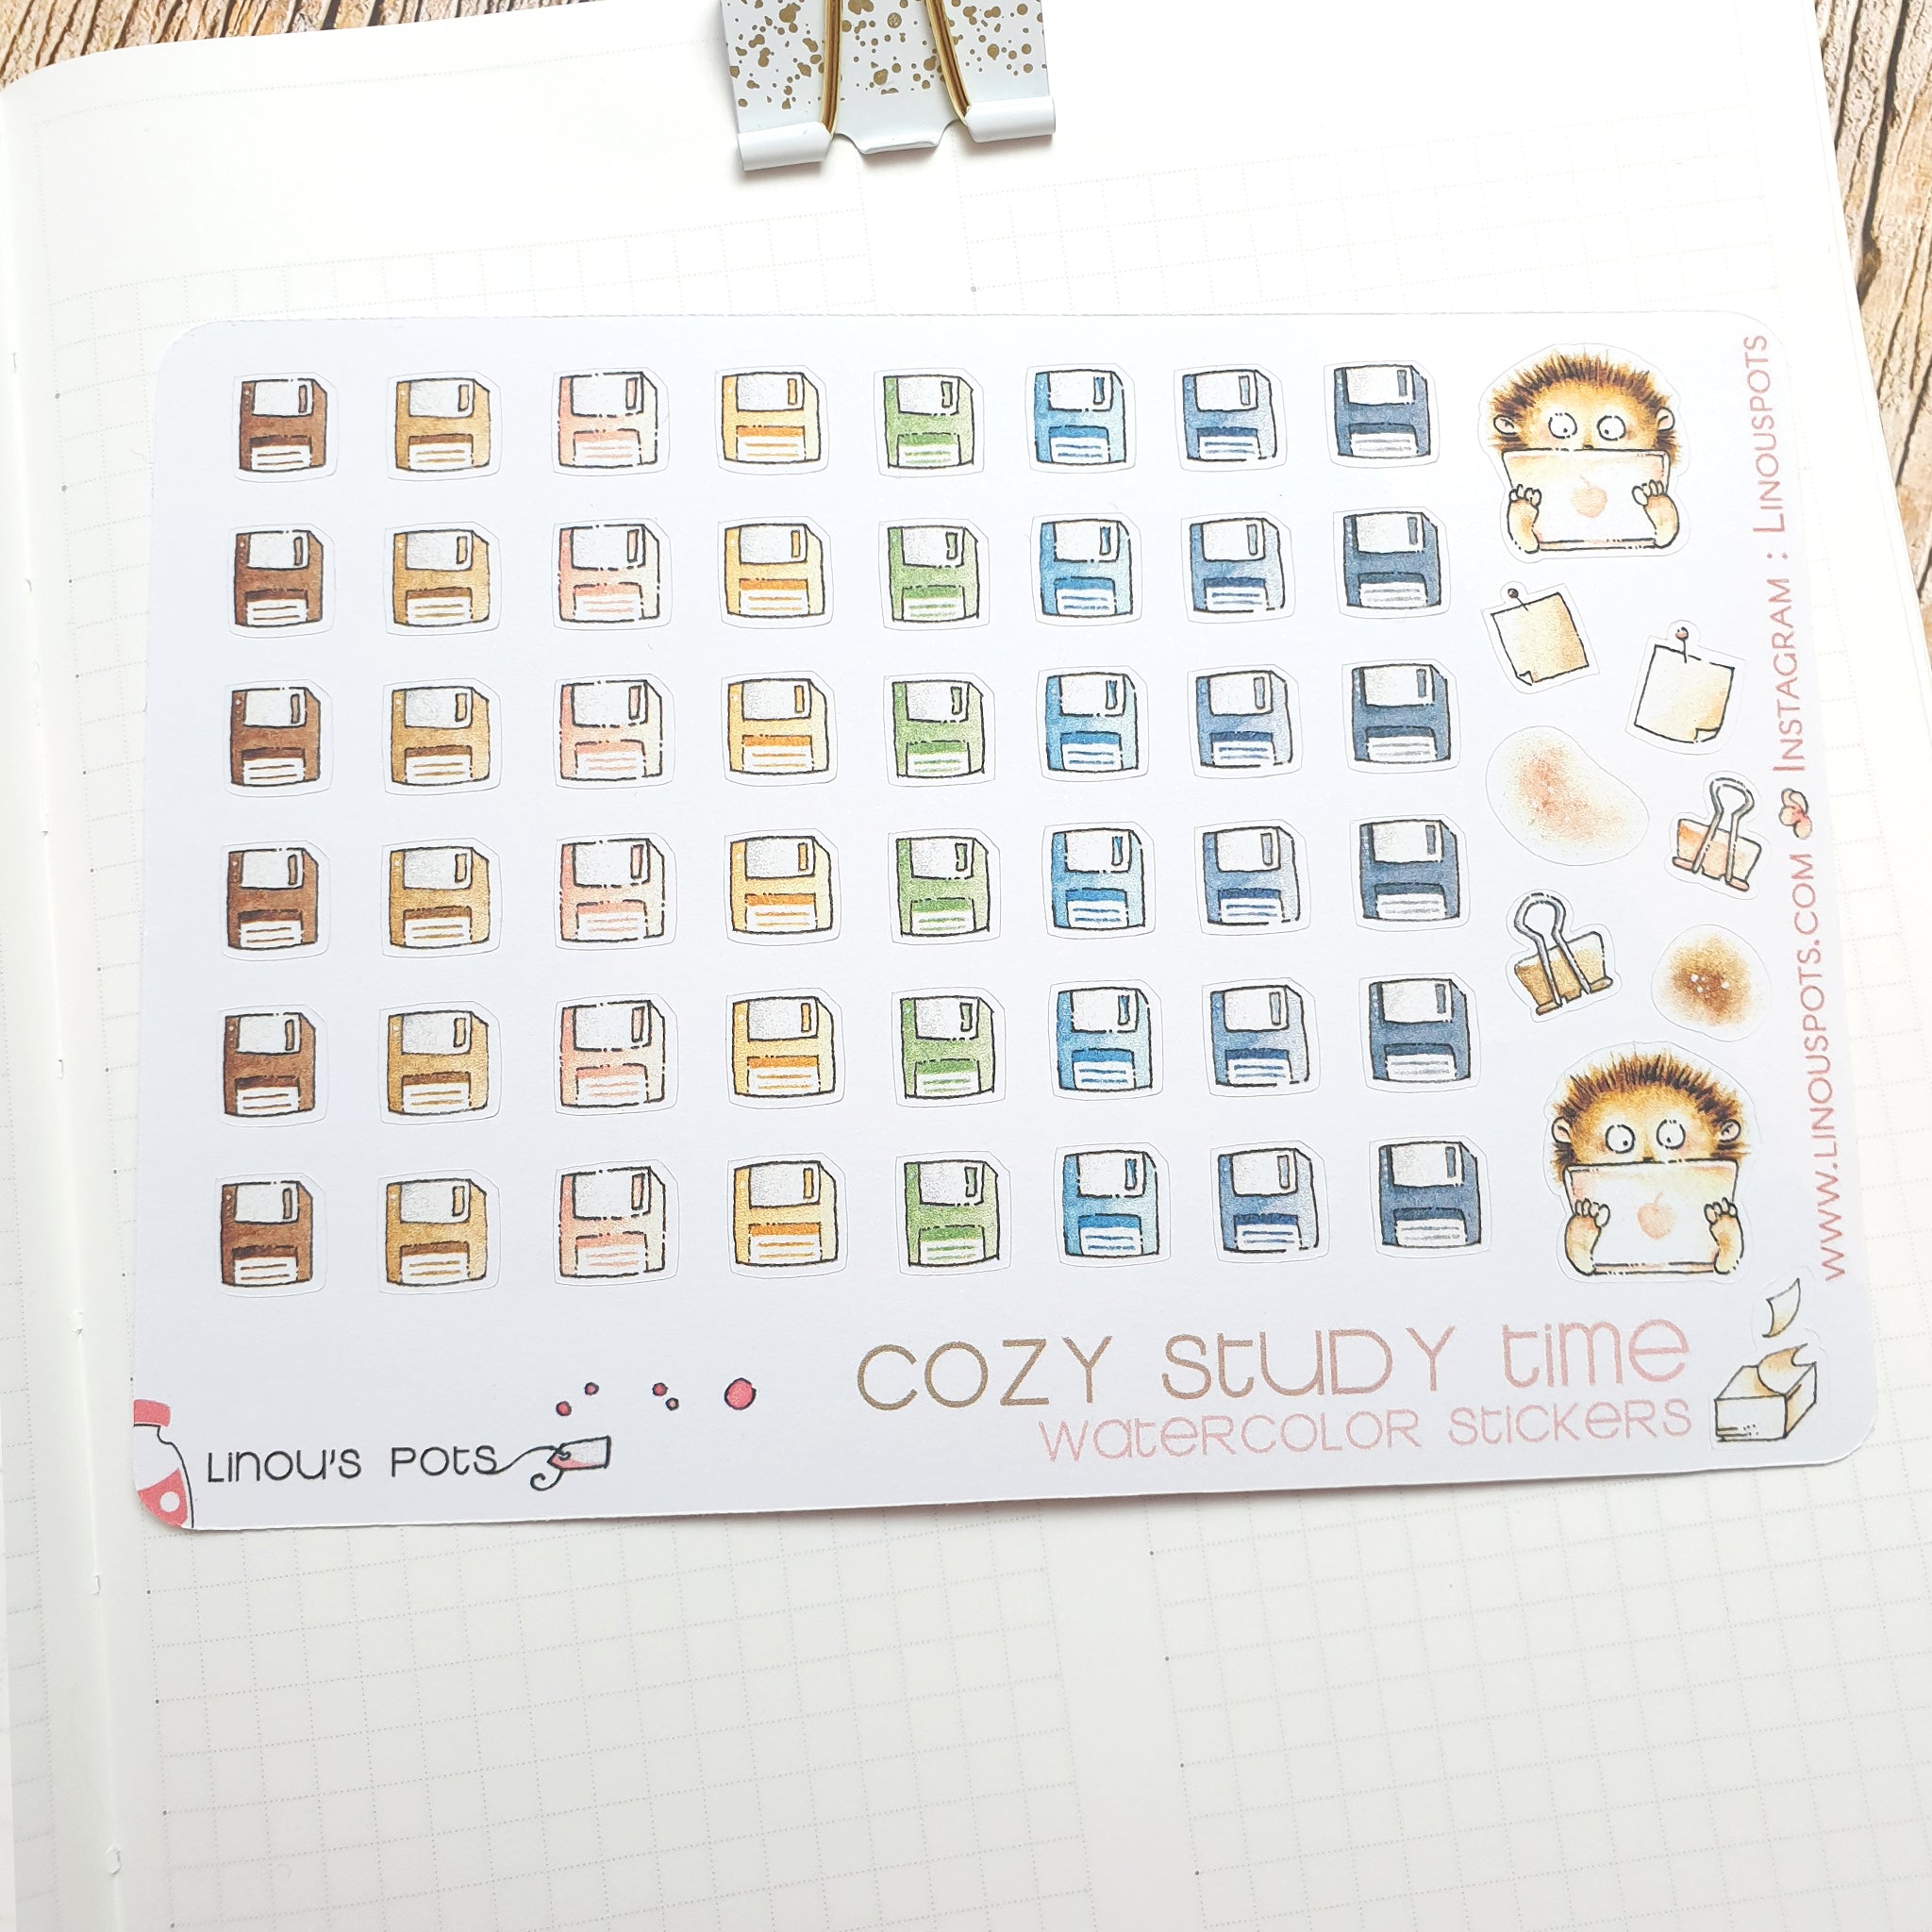 Floppy disks watercolor stickers for planners